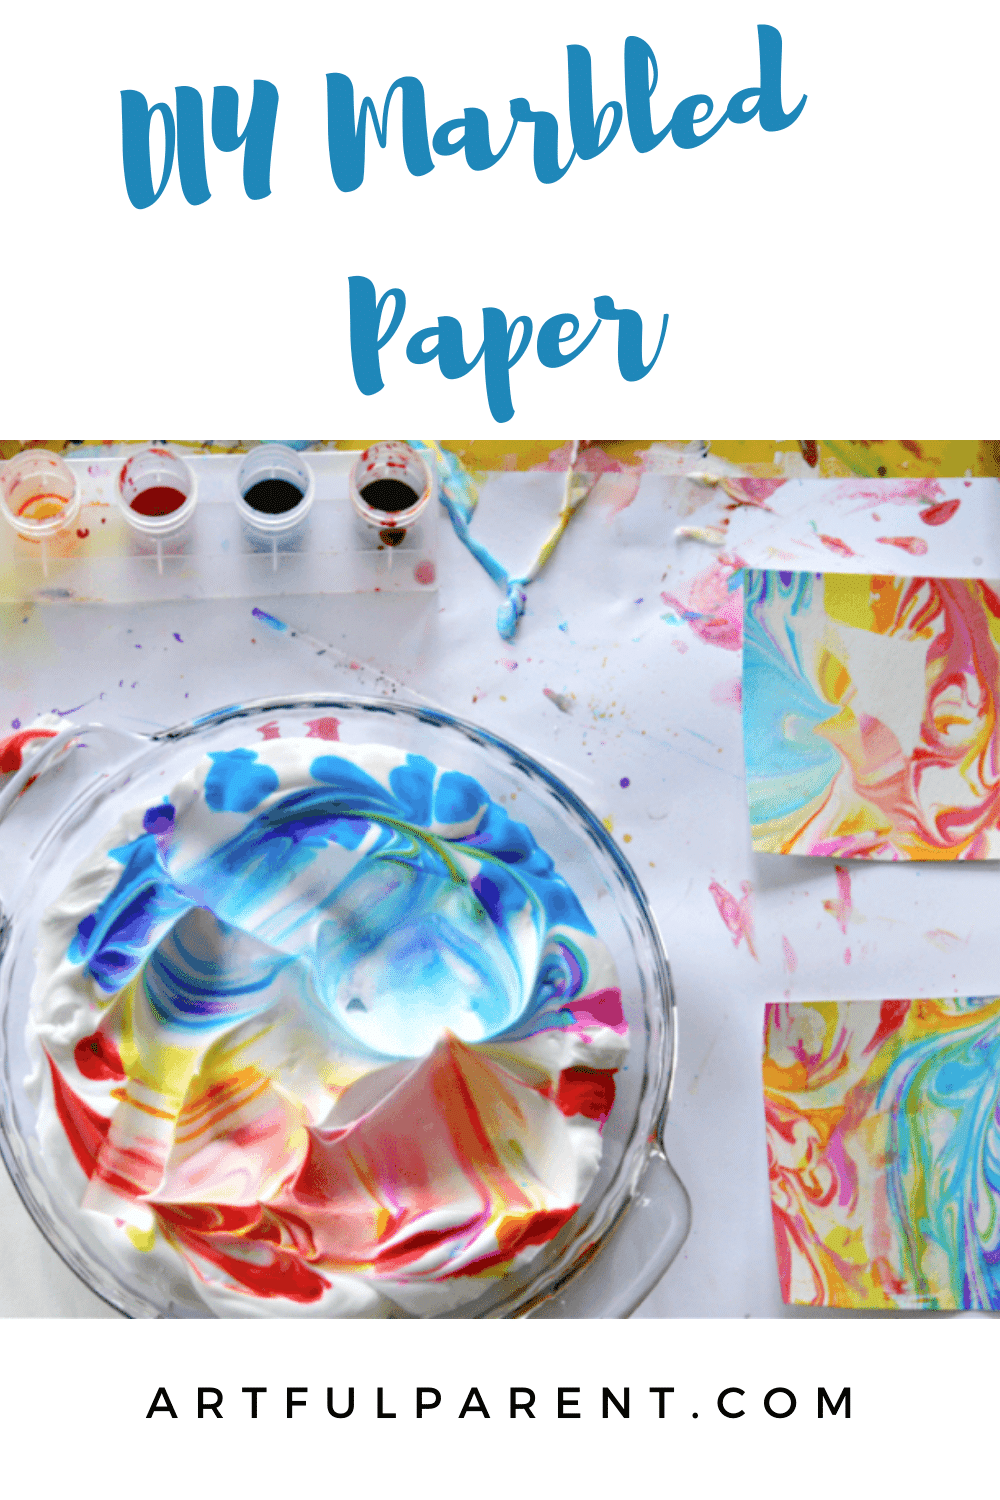 How to Make DIY Marbled Paper the Easy Way